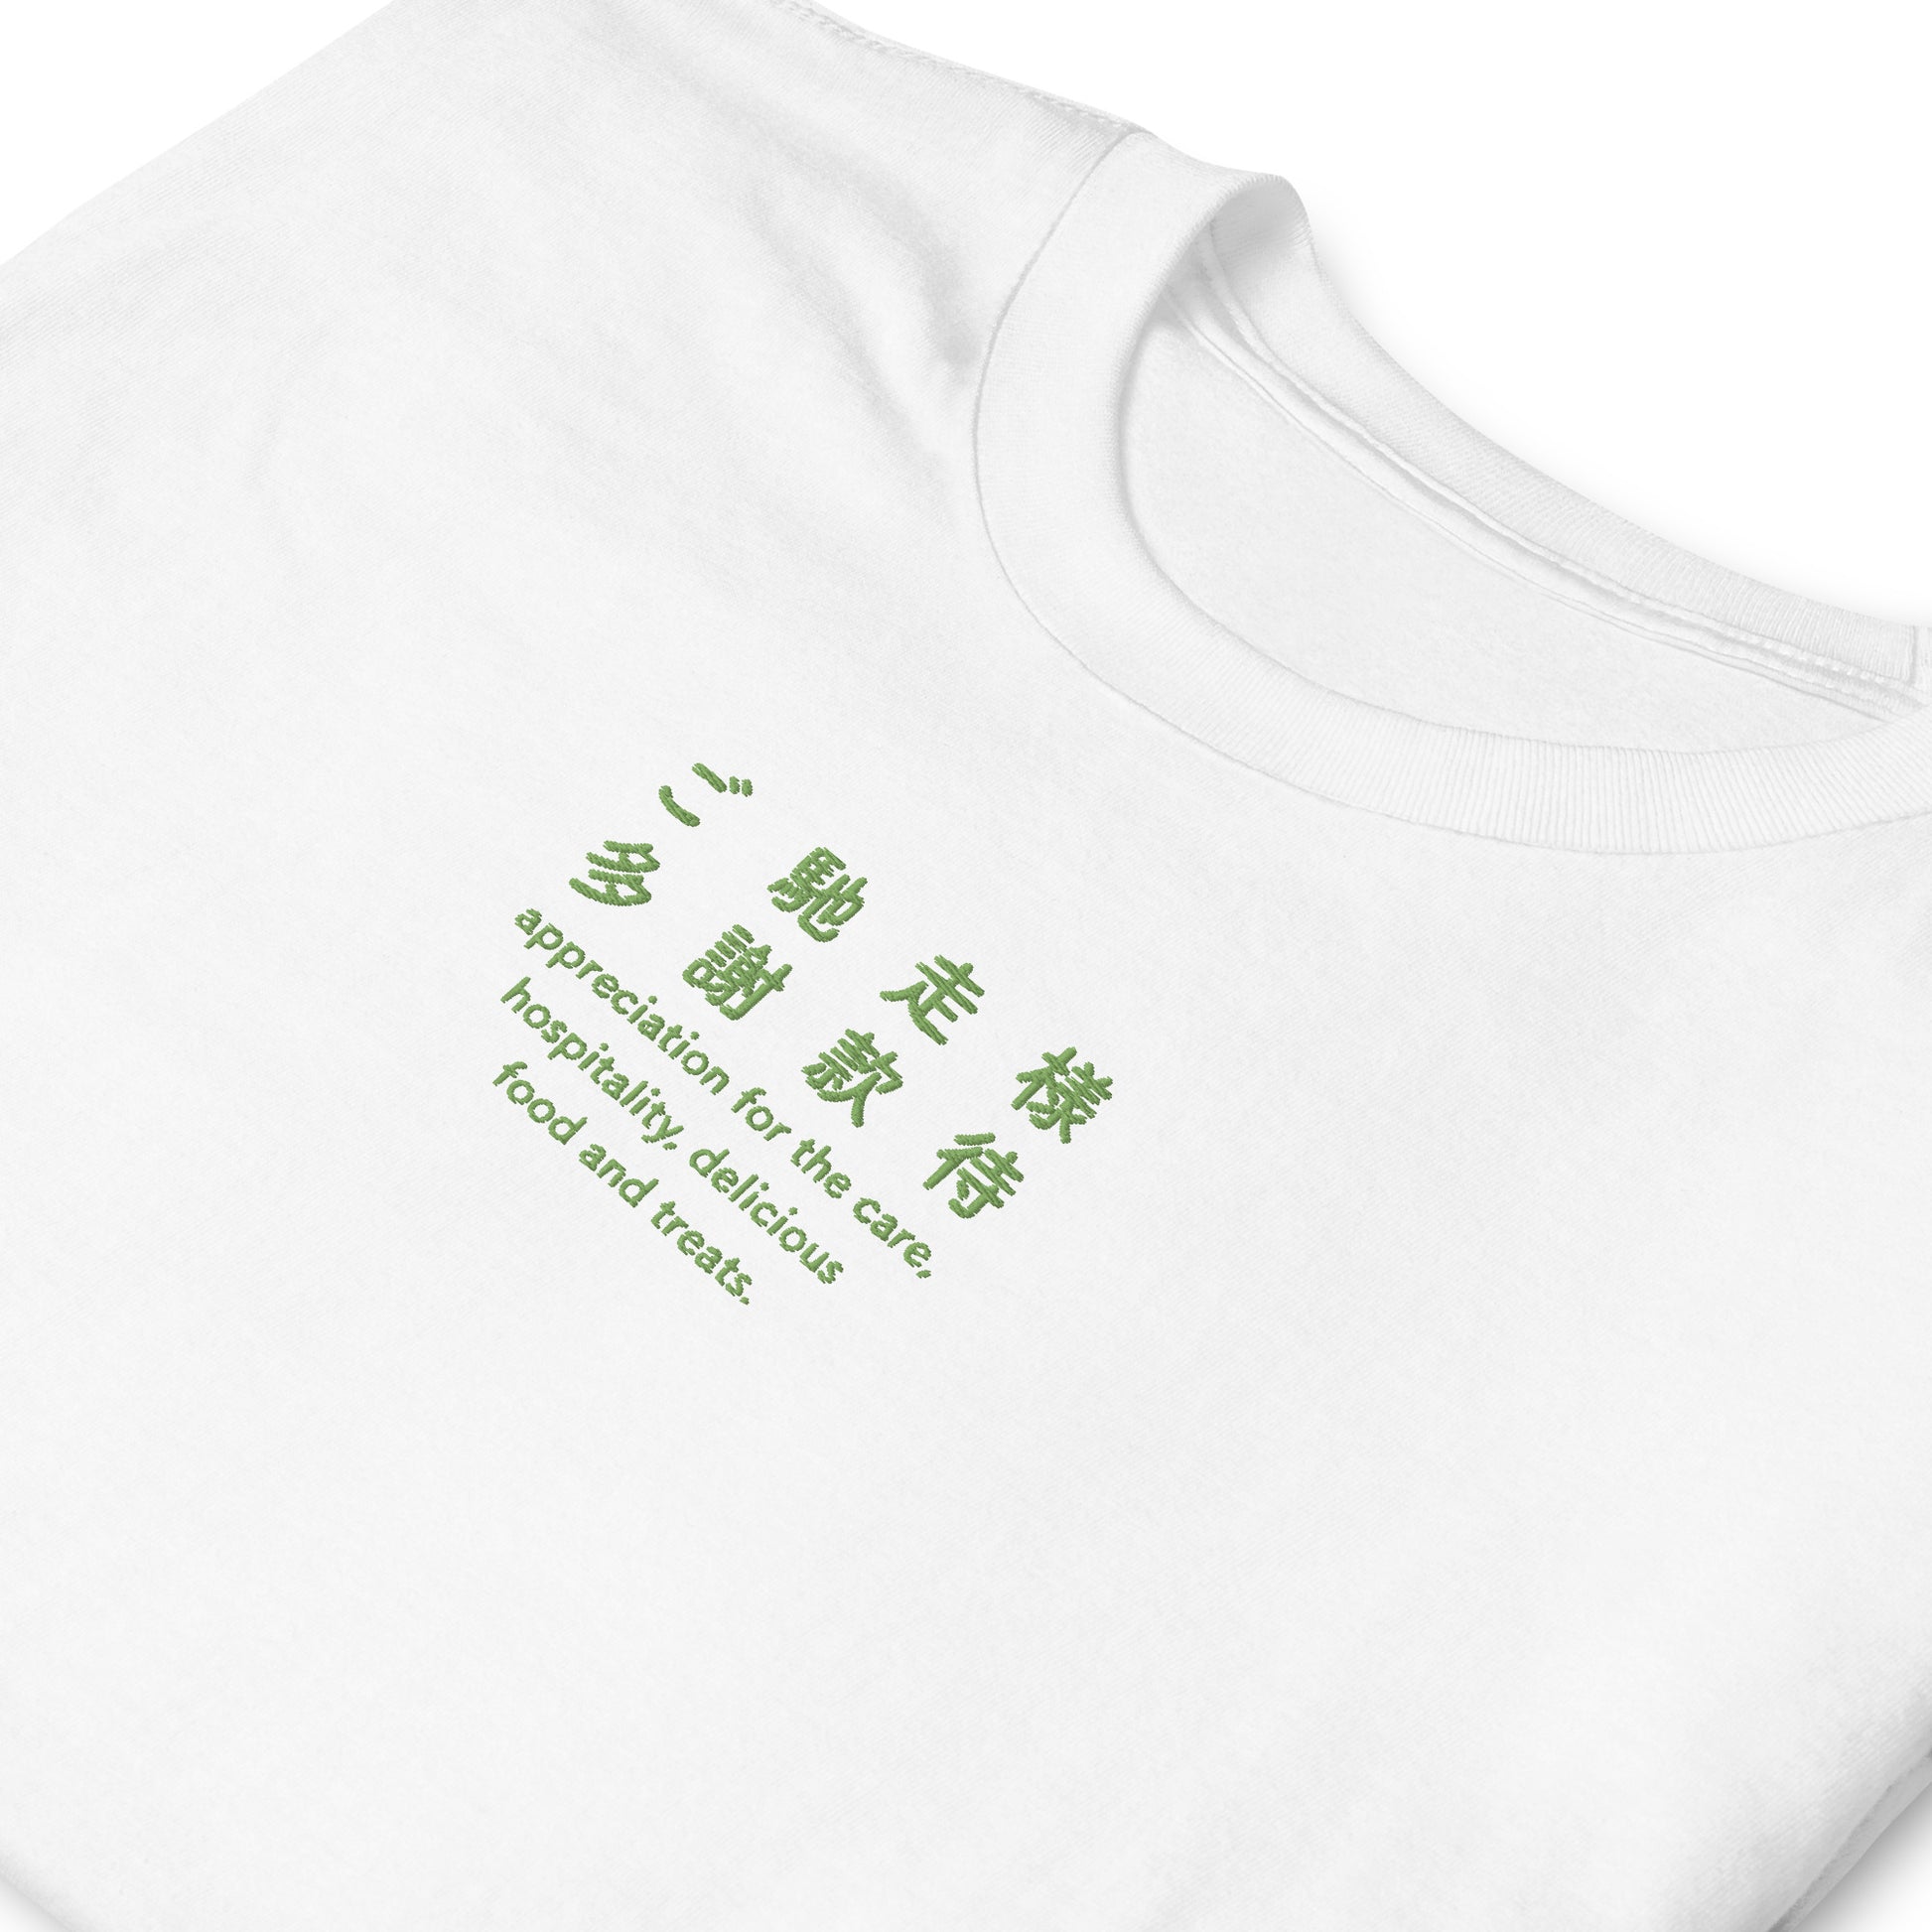 White High Quality Tee - Front Design with an Green Embroidery "Gochisosama" in Japanese,Chinese and English